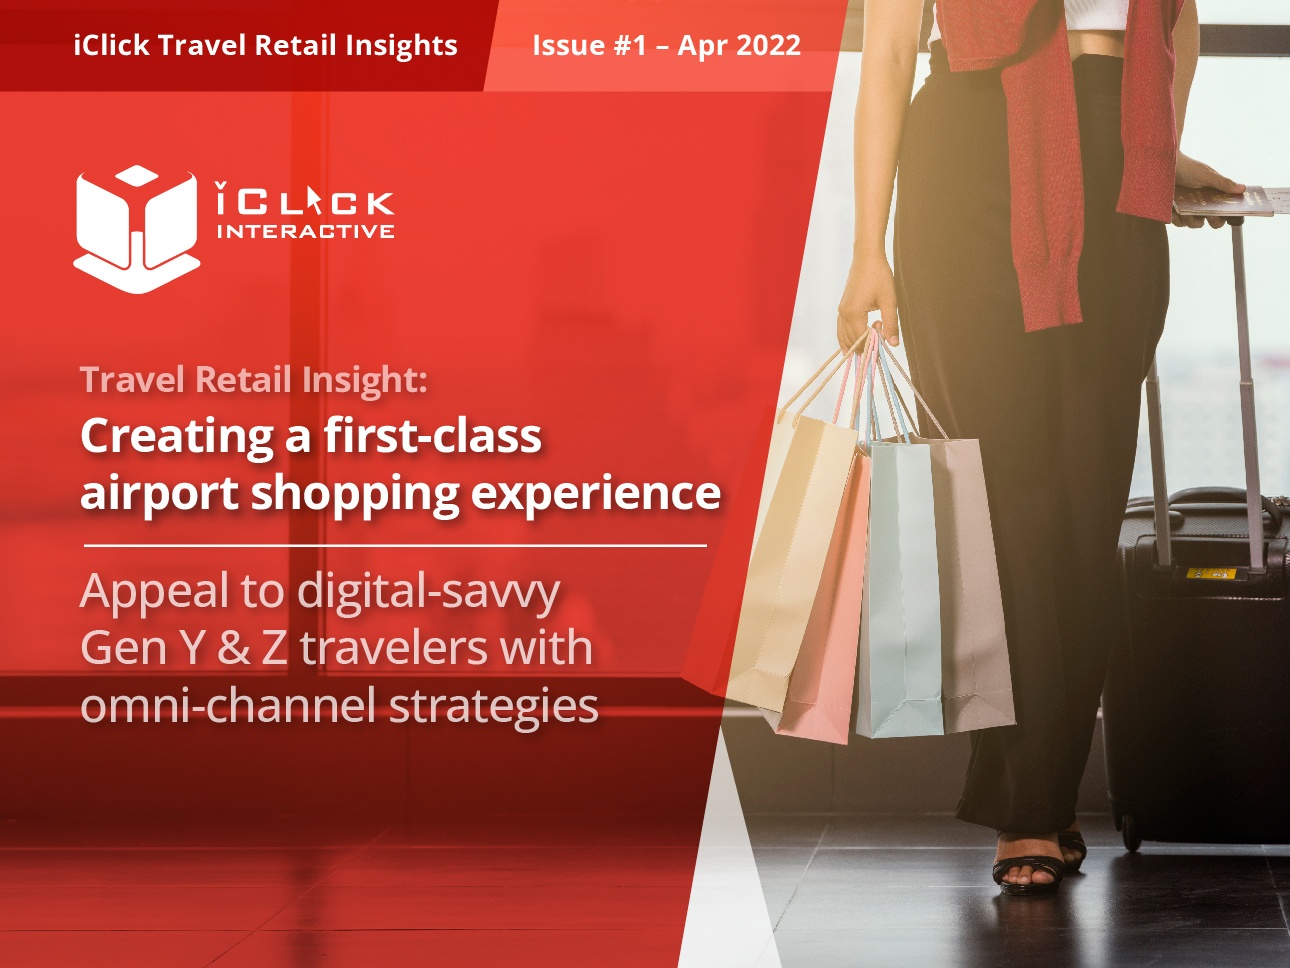 iClick Travel Retail Insights – Issue #1 Creating a First-class Airport Shopping Experience: Appeal to Digital-savvy Gen Y & Z Travelers with Omni-channel Strategies